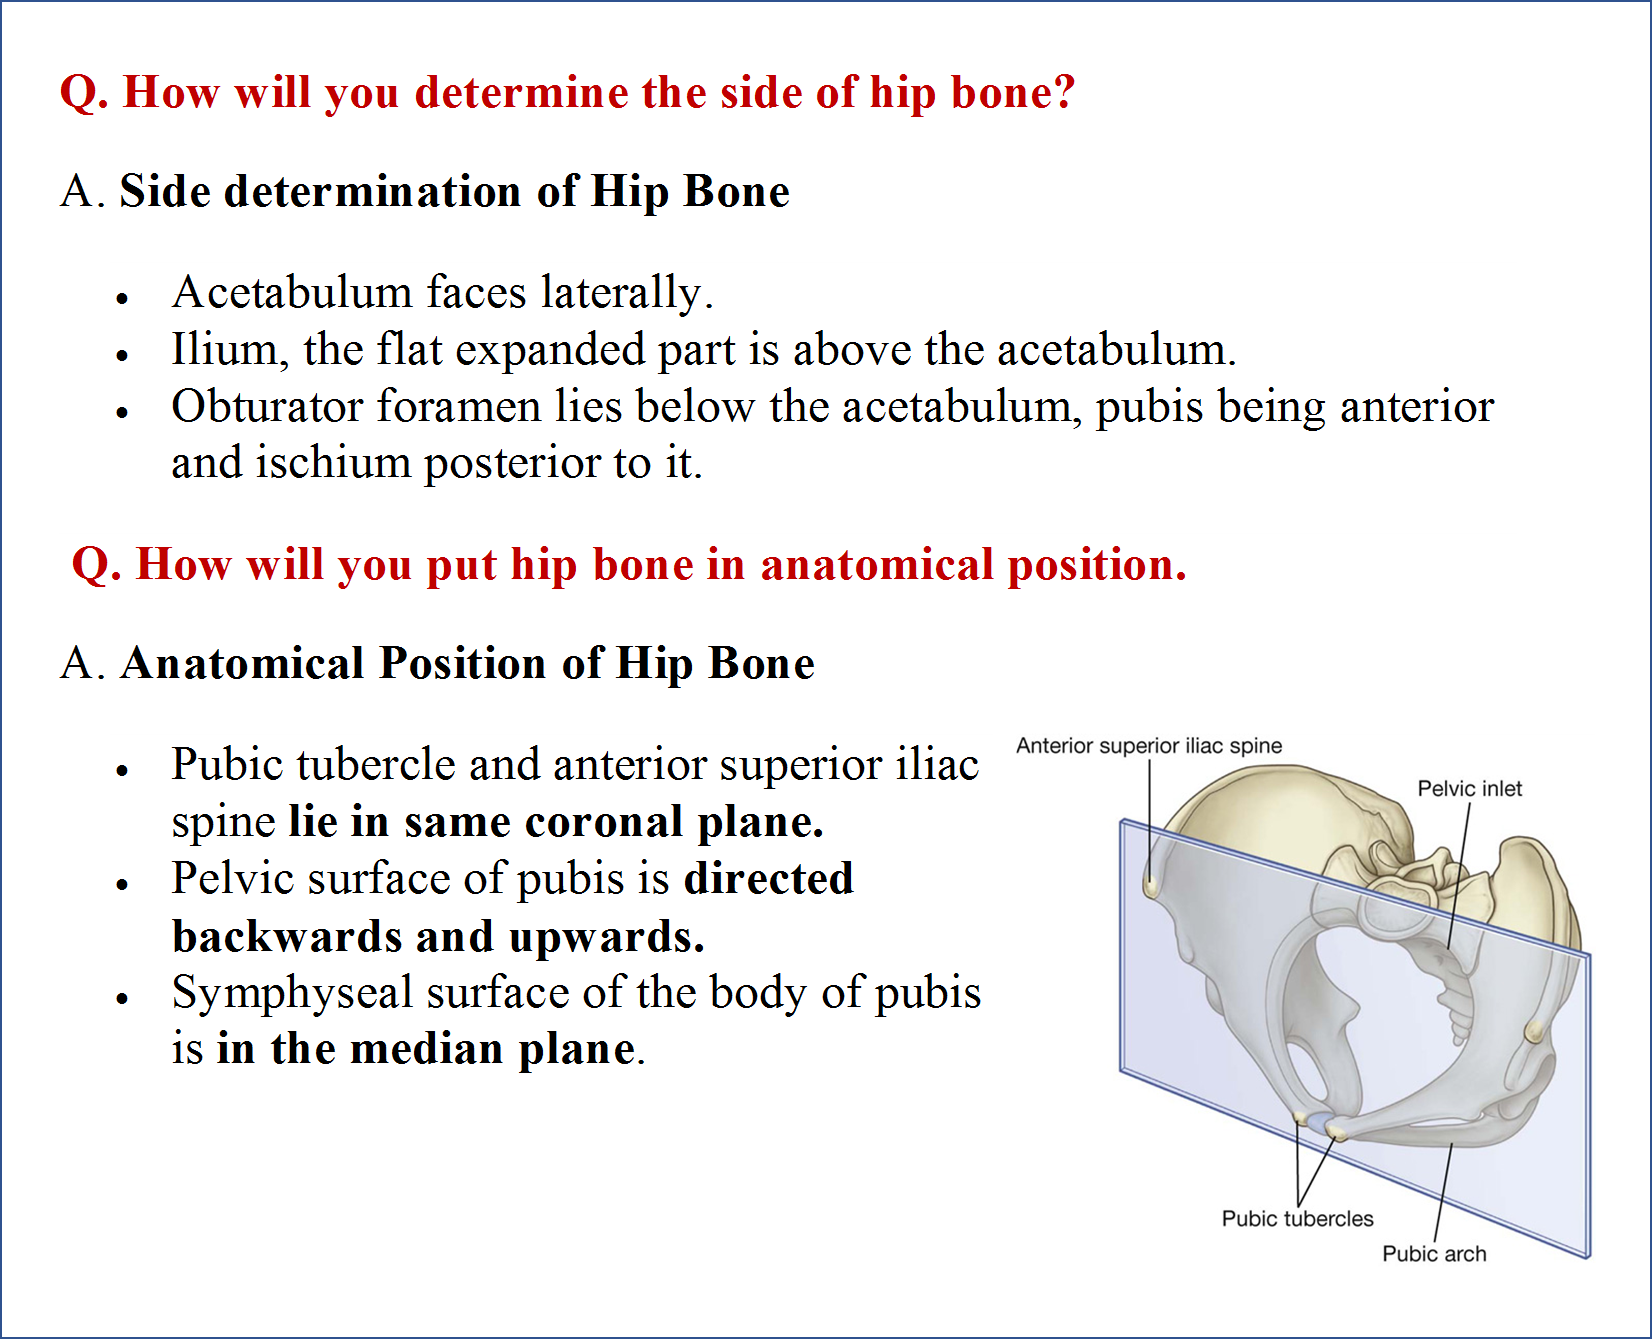 Side determination and anatomical position of hip bone